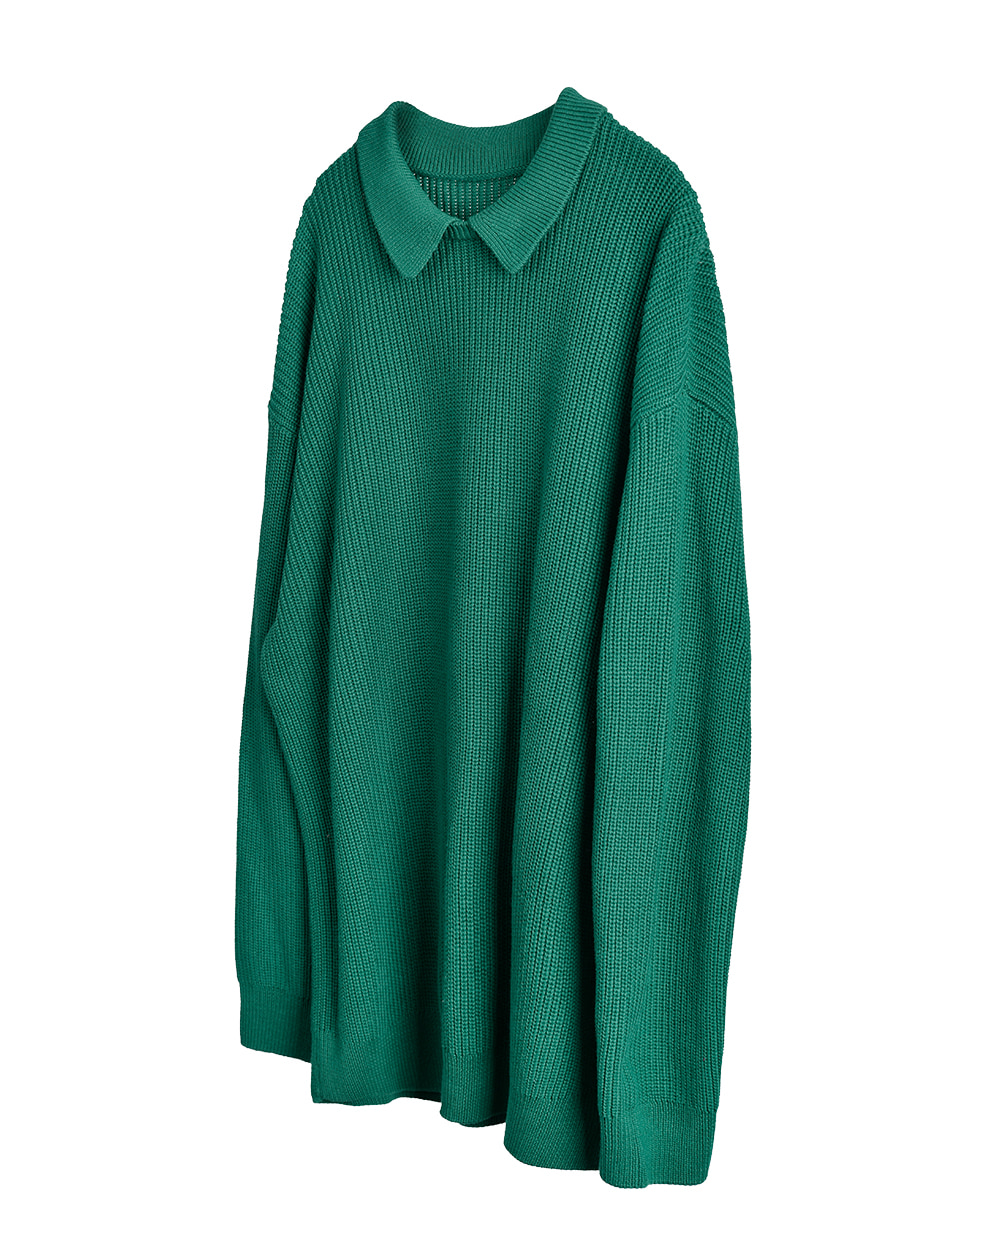 aeae COLLAR KNIT SWEATER (Forest)